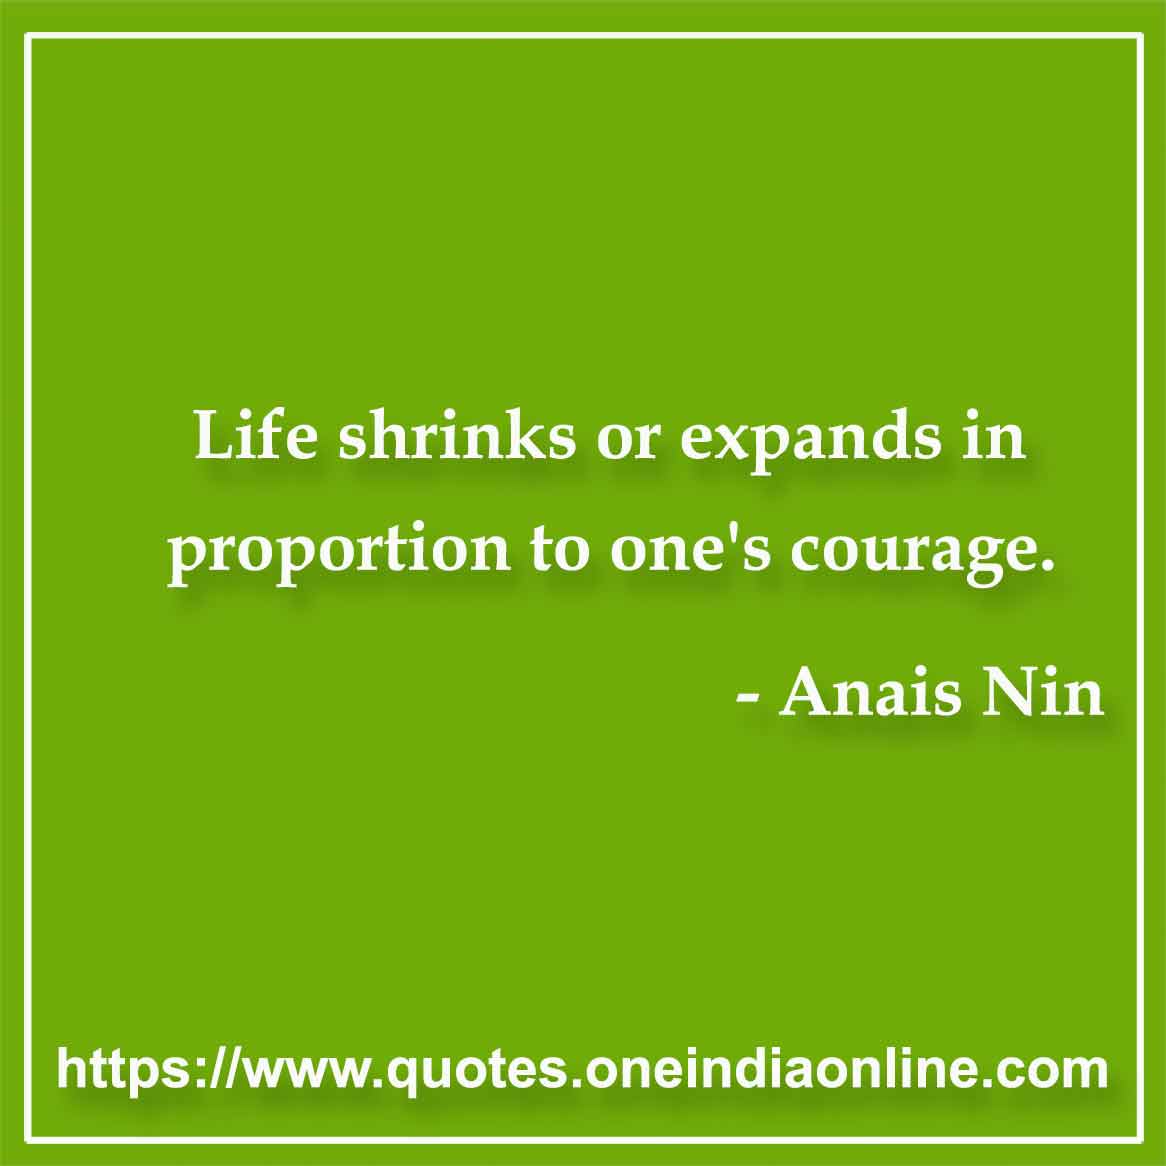 Life shrinks or expands in proportion to one's courage.

- Courage Quotes by Anais Nin